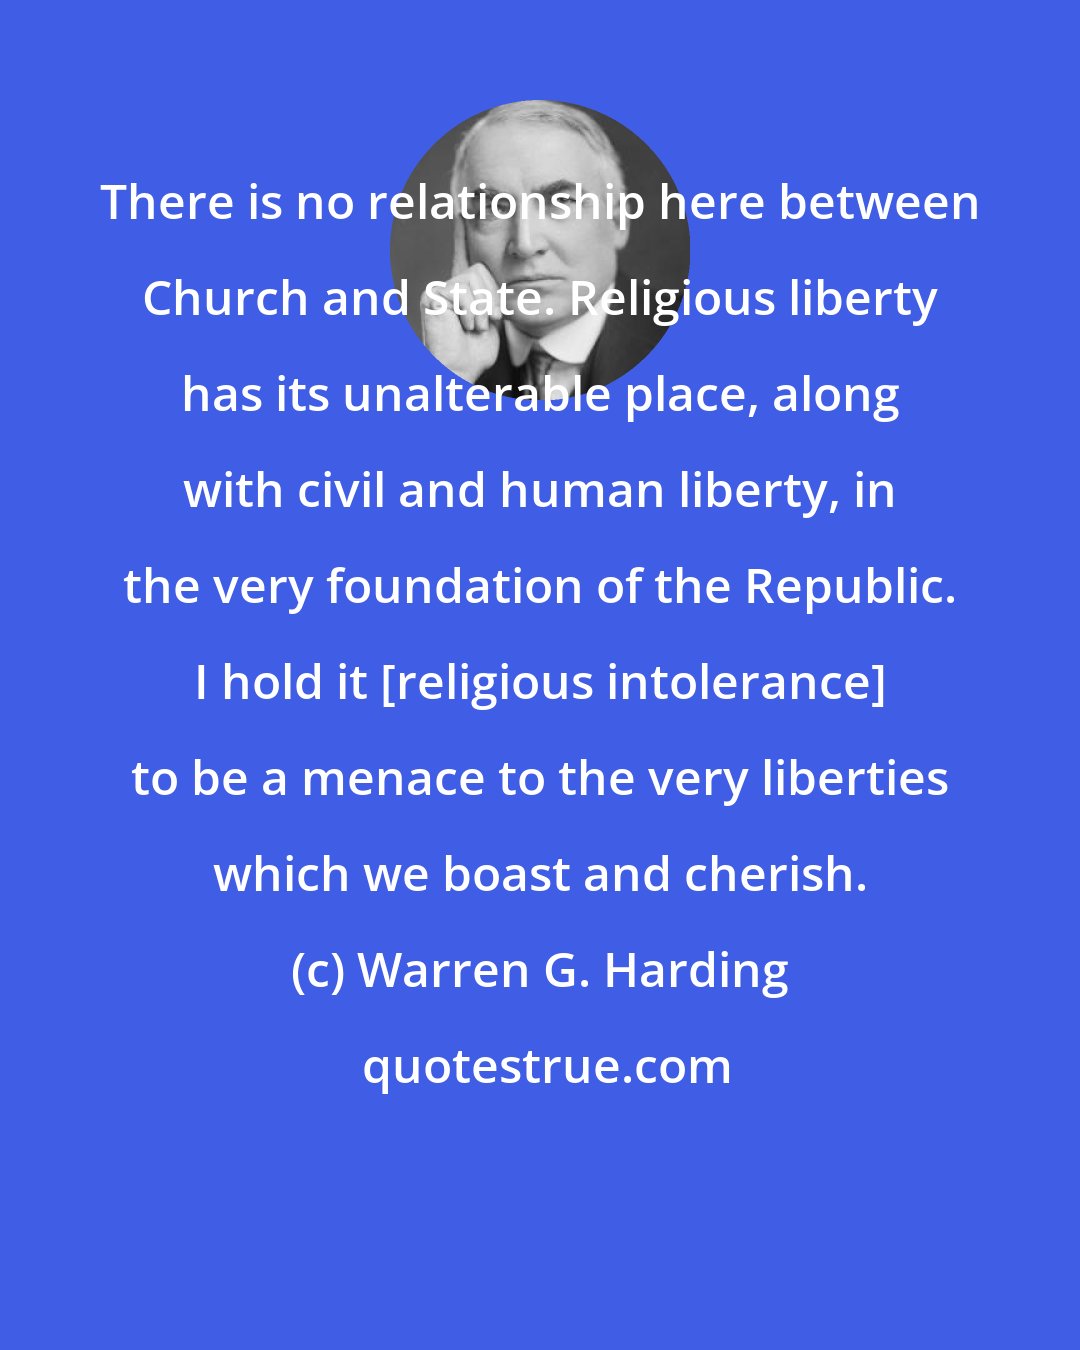 Warren G. Harding: There is no relationship here between Church and State. Religious liberty has its unalterable place, along with civil and human liberty, in the very foundation of the Republic. I hold it [religious intolerance] to be a menace to the very liberties which we boast and cherish.